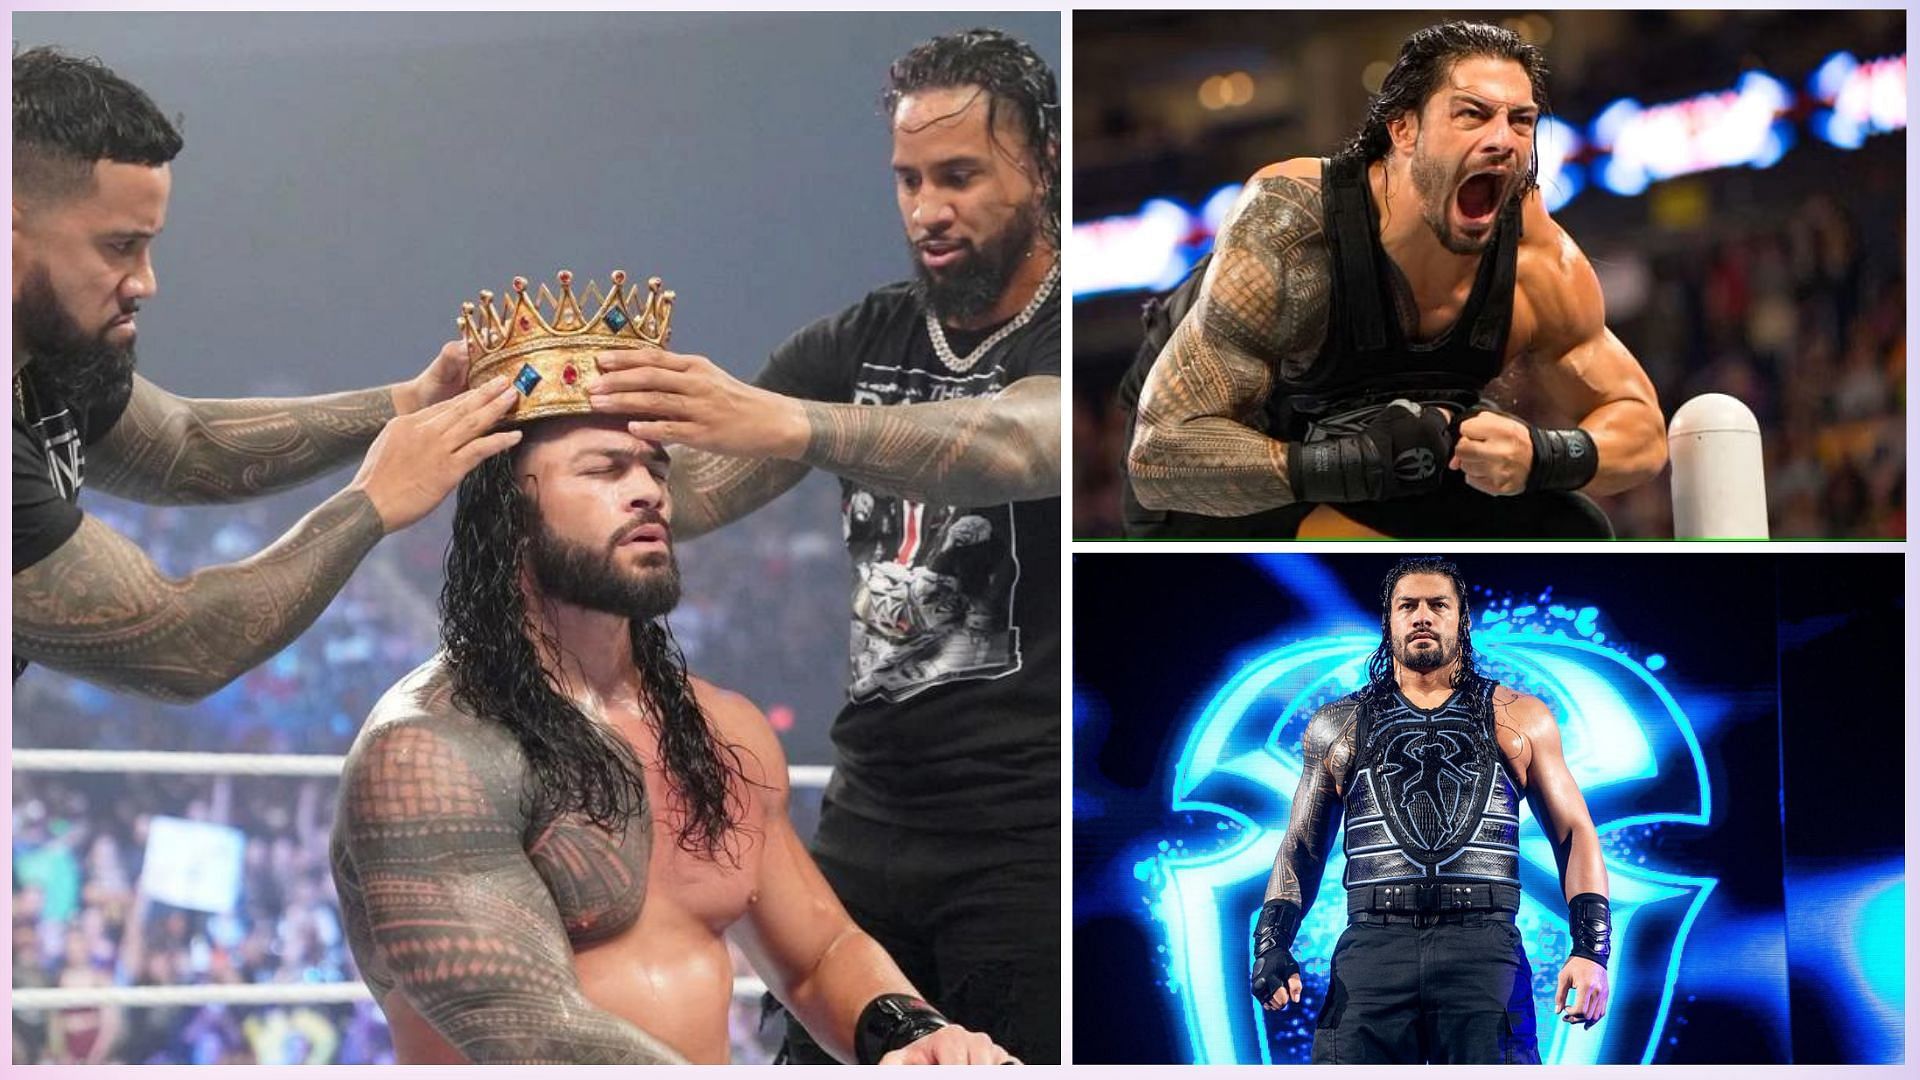 Roman Reigns is unstoppable with his 